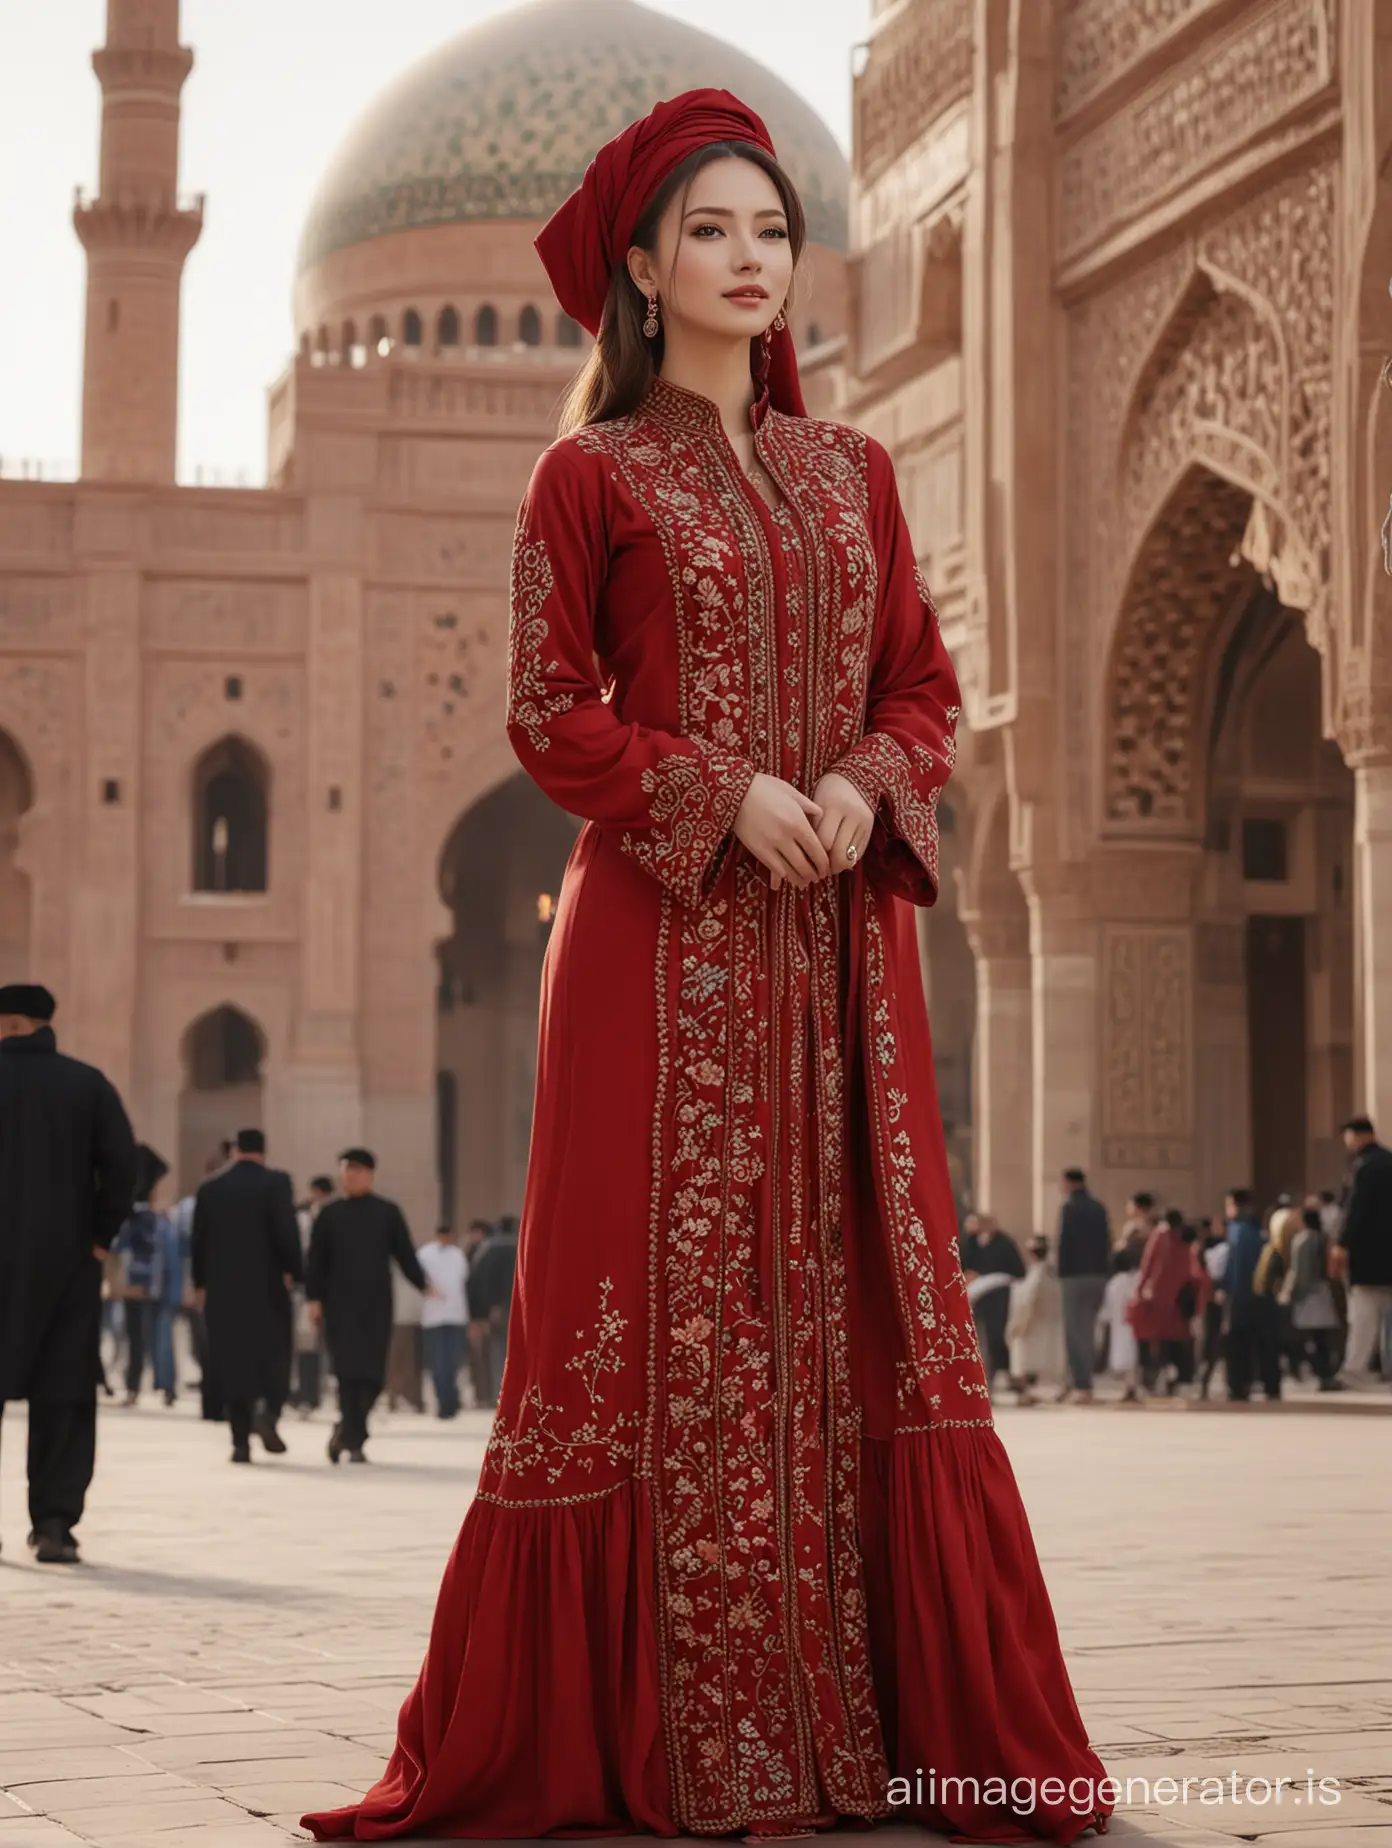 Uyghur-Girl-in-Exquisite-Red-Abaya-at-Majestic-Mosque